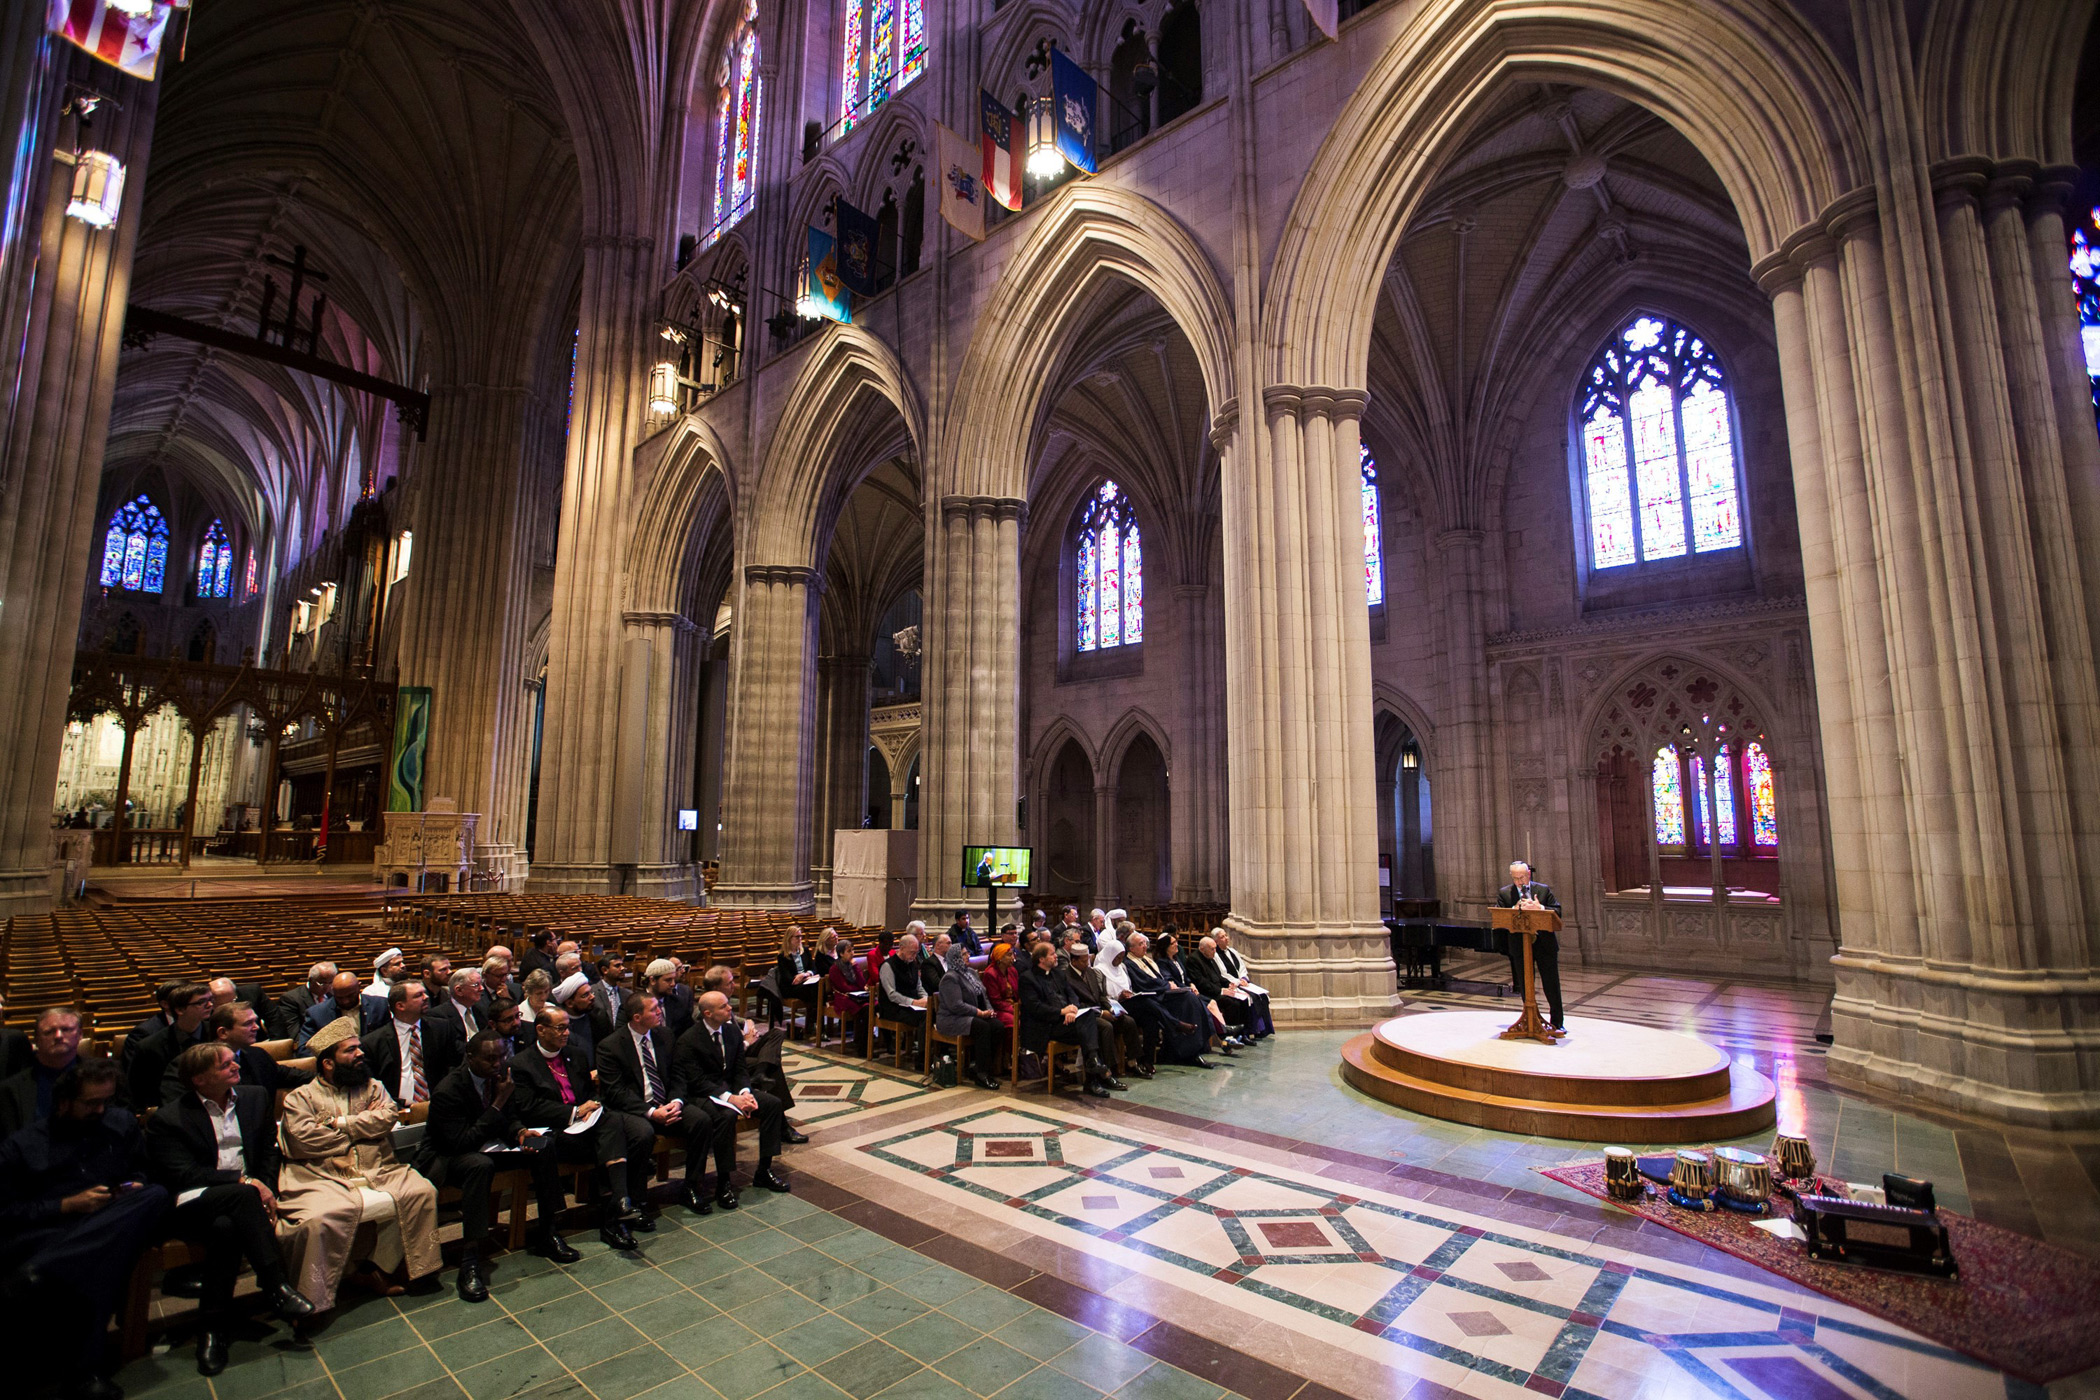 Washington National Cathedral, Washington, D.C. Easter Services: 8:00 a.m. and 11:00 a.m. Festival Holy Eucharist